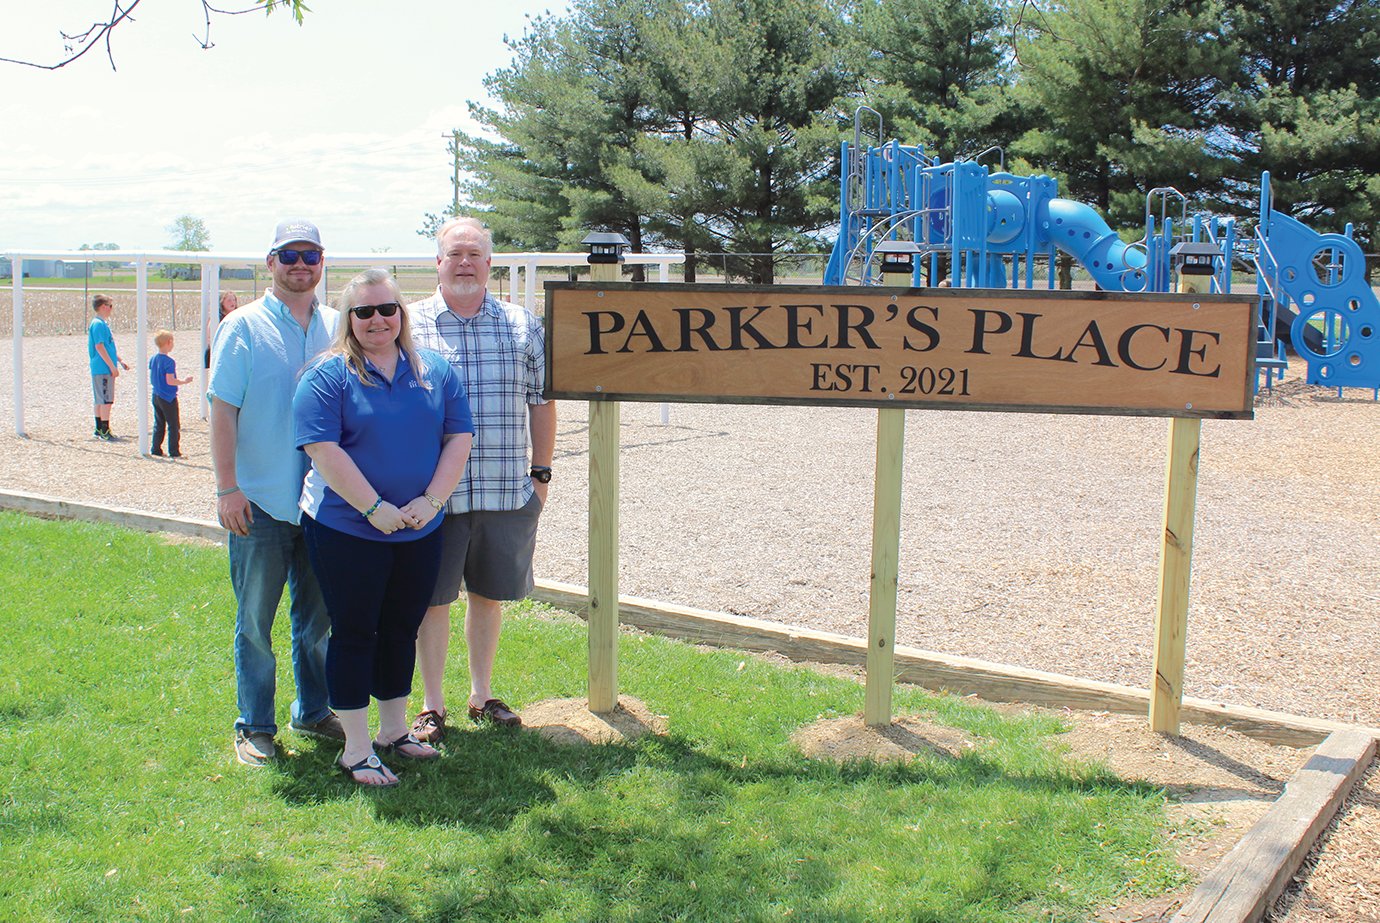 Clinton Schroll, from left, Lenna Schroll and Jeffrey Schroll dedicate Parker’s Place on Friday at Walnut Elementary for son Parker Schroll who passed away in May last year following a fatal car crash. A 2020 Southmont graduate, Parker loved his days as a Walnut Flyer. A dedication ceremony was held Friday at the school in Parker’s honor, who would have thoroughly enjoyed the thought of bringing a lasting form of fun to both current and future Flyers, his mother said.